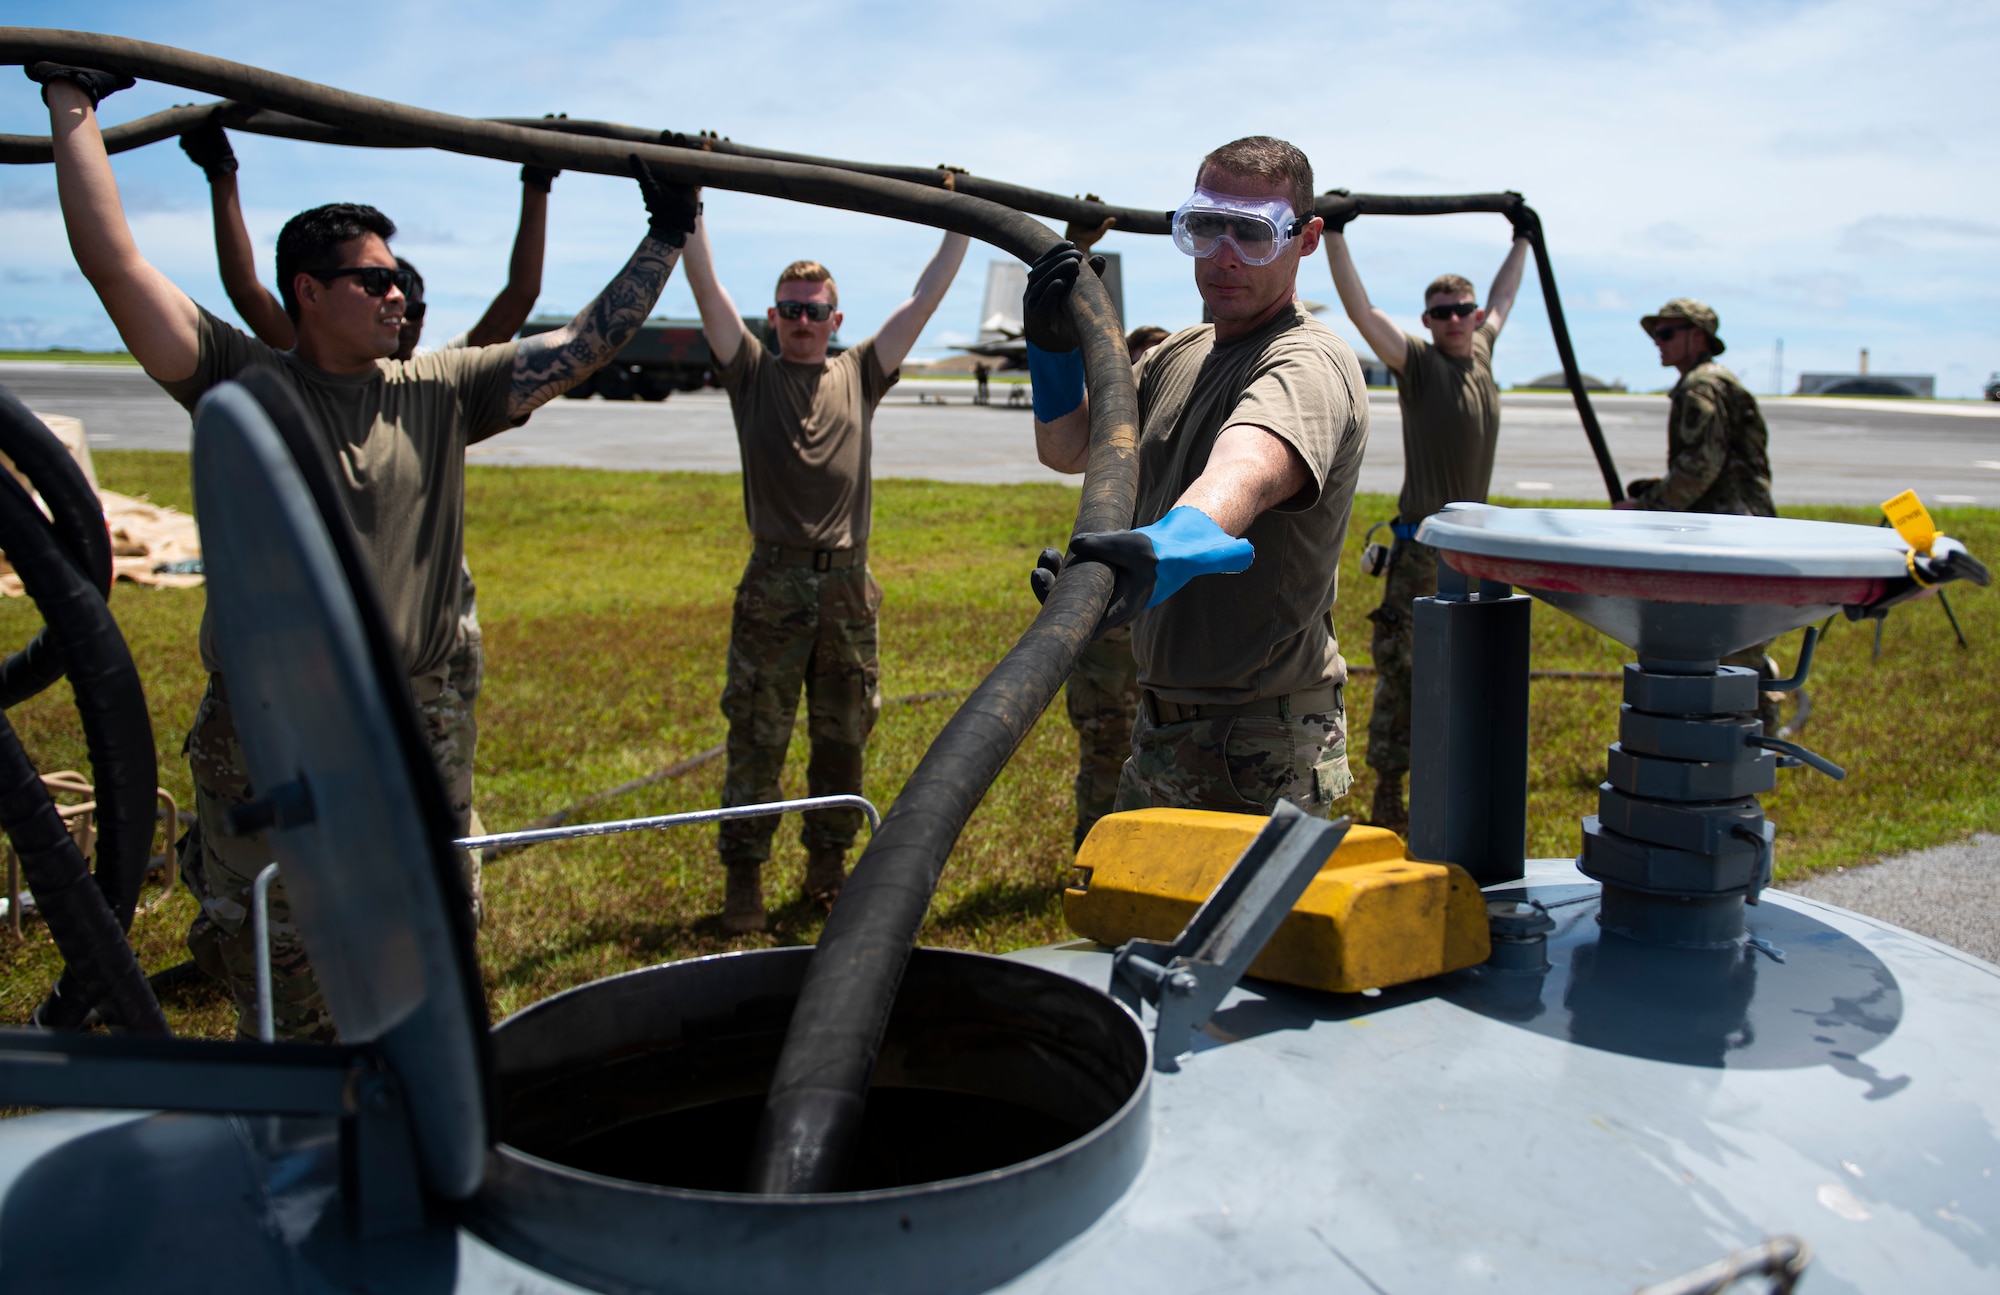 U.S. Air Force Airmen from multiple bases tear down a fuel bladder after a hot refuel during exercise Valiant Shield at Andersen Air Force Base, Guam, Sept. 24, 2020. Valiant Shield is a U.S.-only, biennial field training exercise (FTX) with a focus on integration of joint training among U.S. forces in relation to current operational plans. This training enables real-world proficiency in sustaining joint forces through detecting, locating, tracking and engaging units at sea, in the air, on land, and in cyberspace in response to a range of mission areas. ( U.S. Air Force photo by Senior Airman Michael S. Murphy)